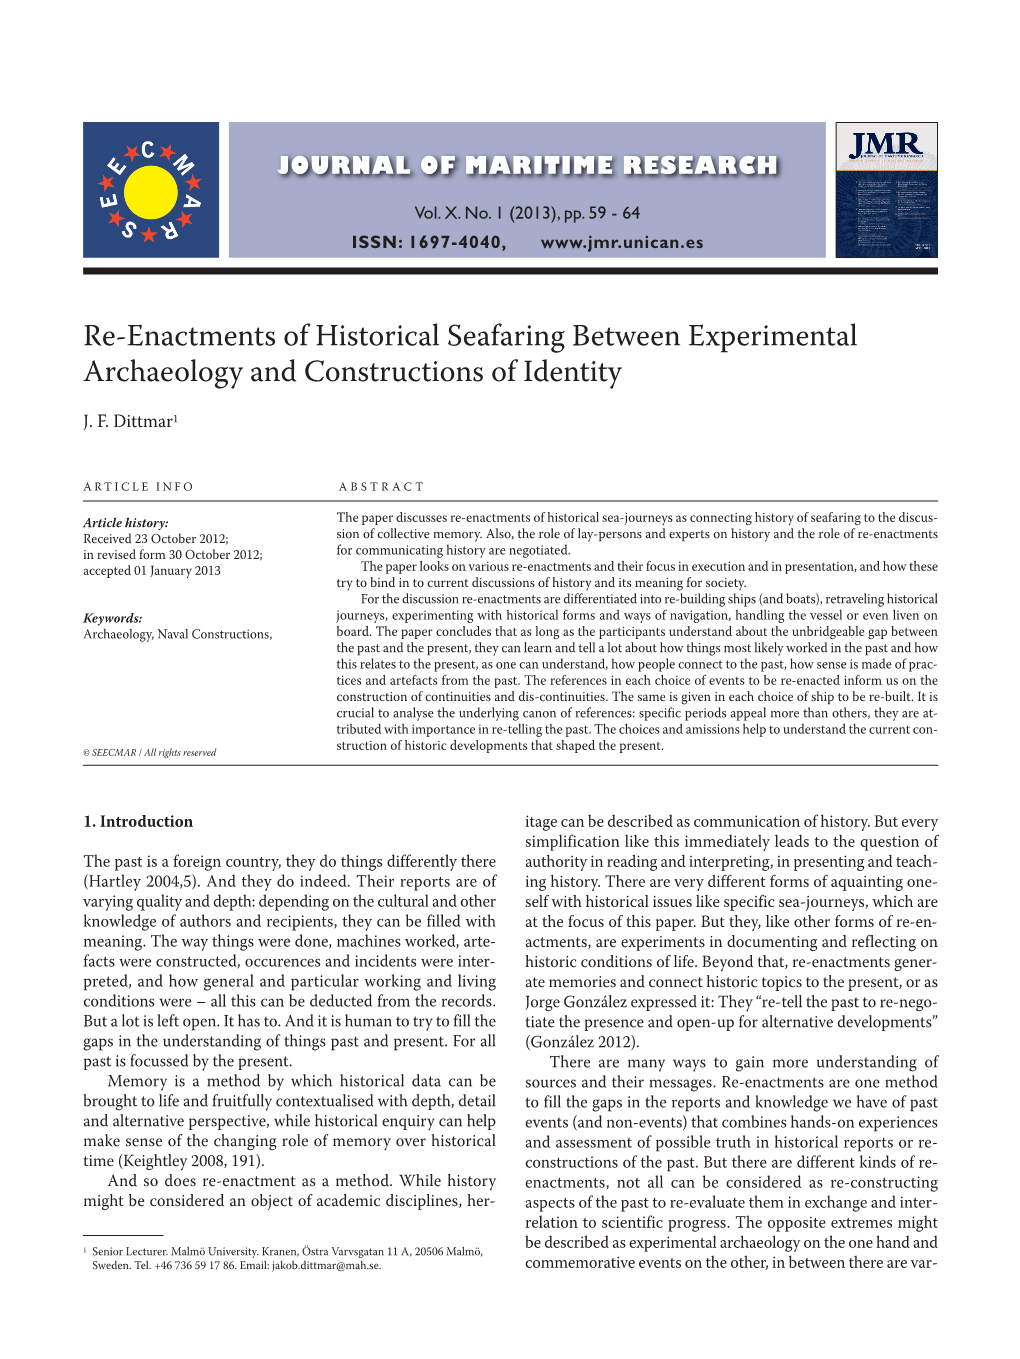 Re-Enactments of Historical Seafaring Between Experimental Archaeology and Constructions of Identity